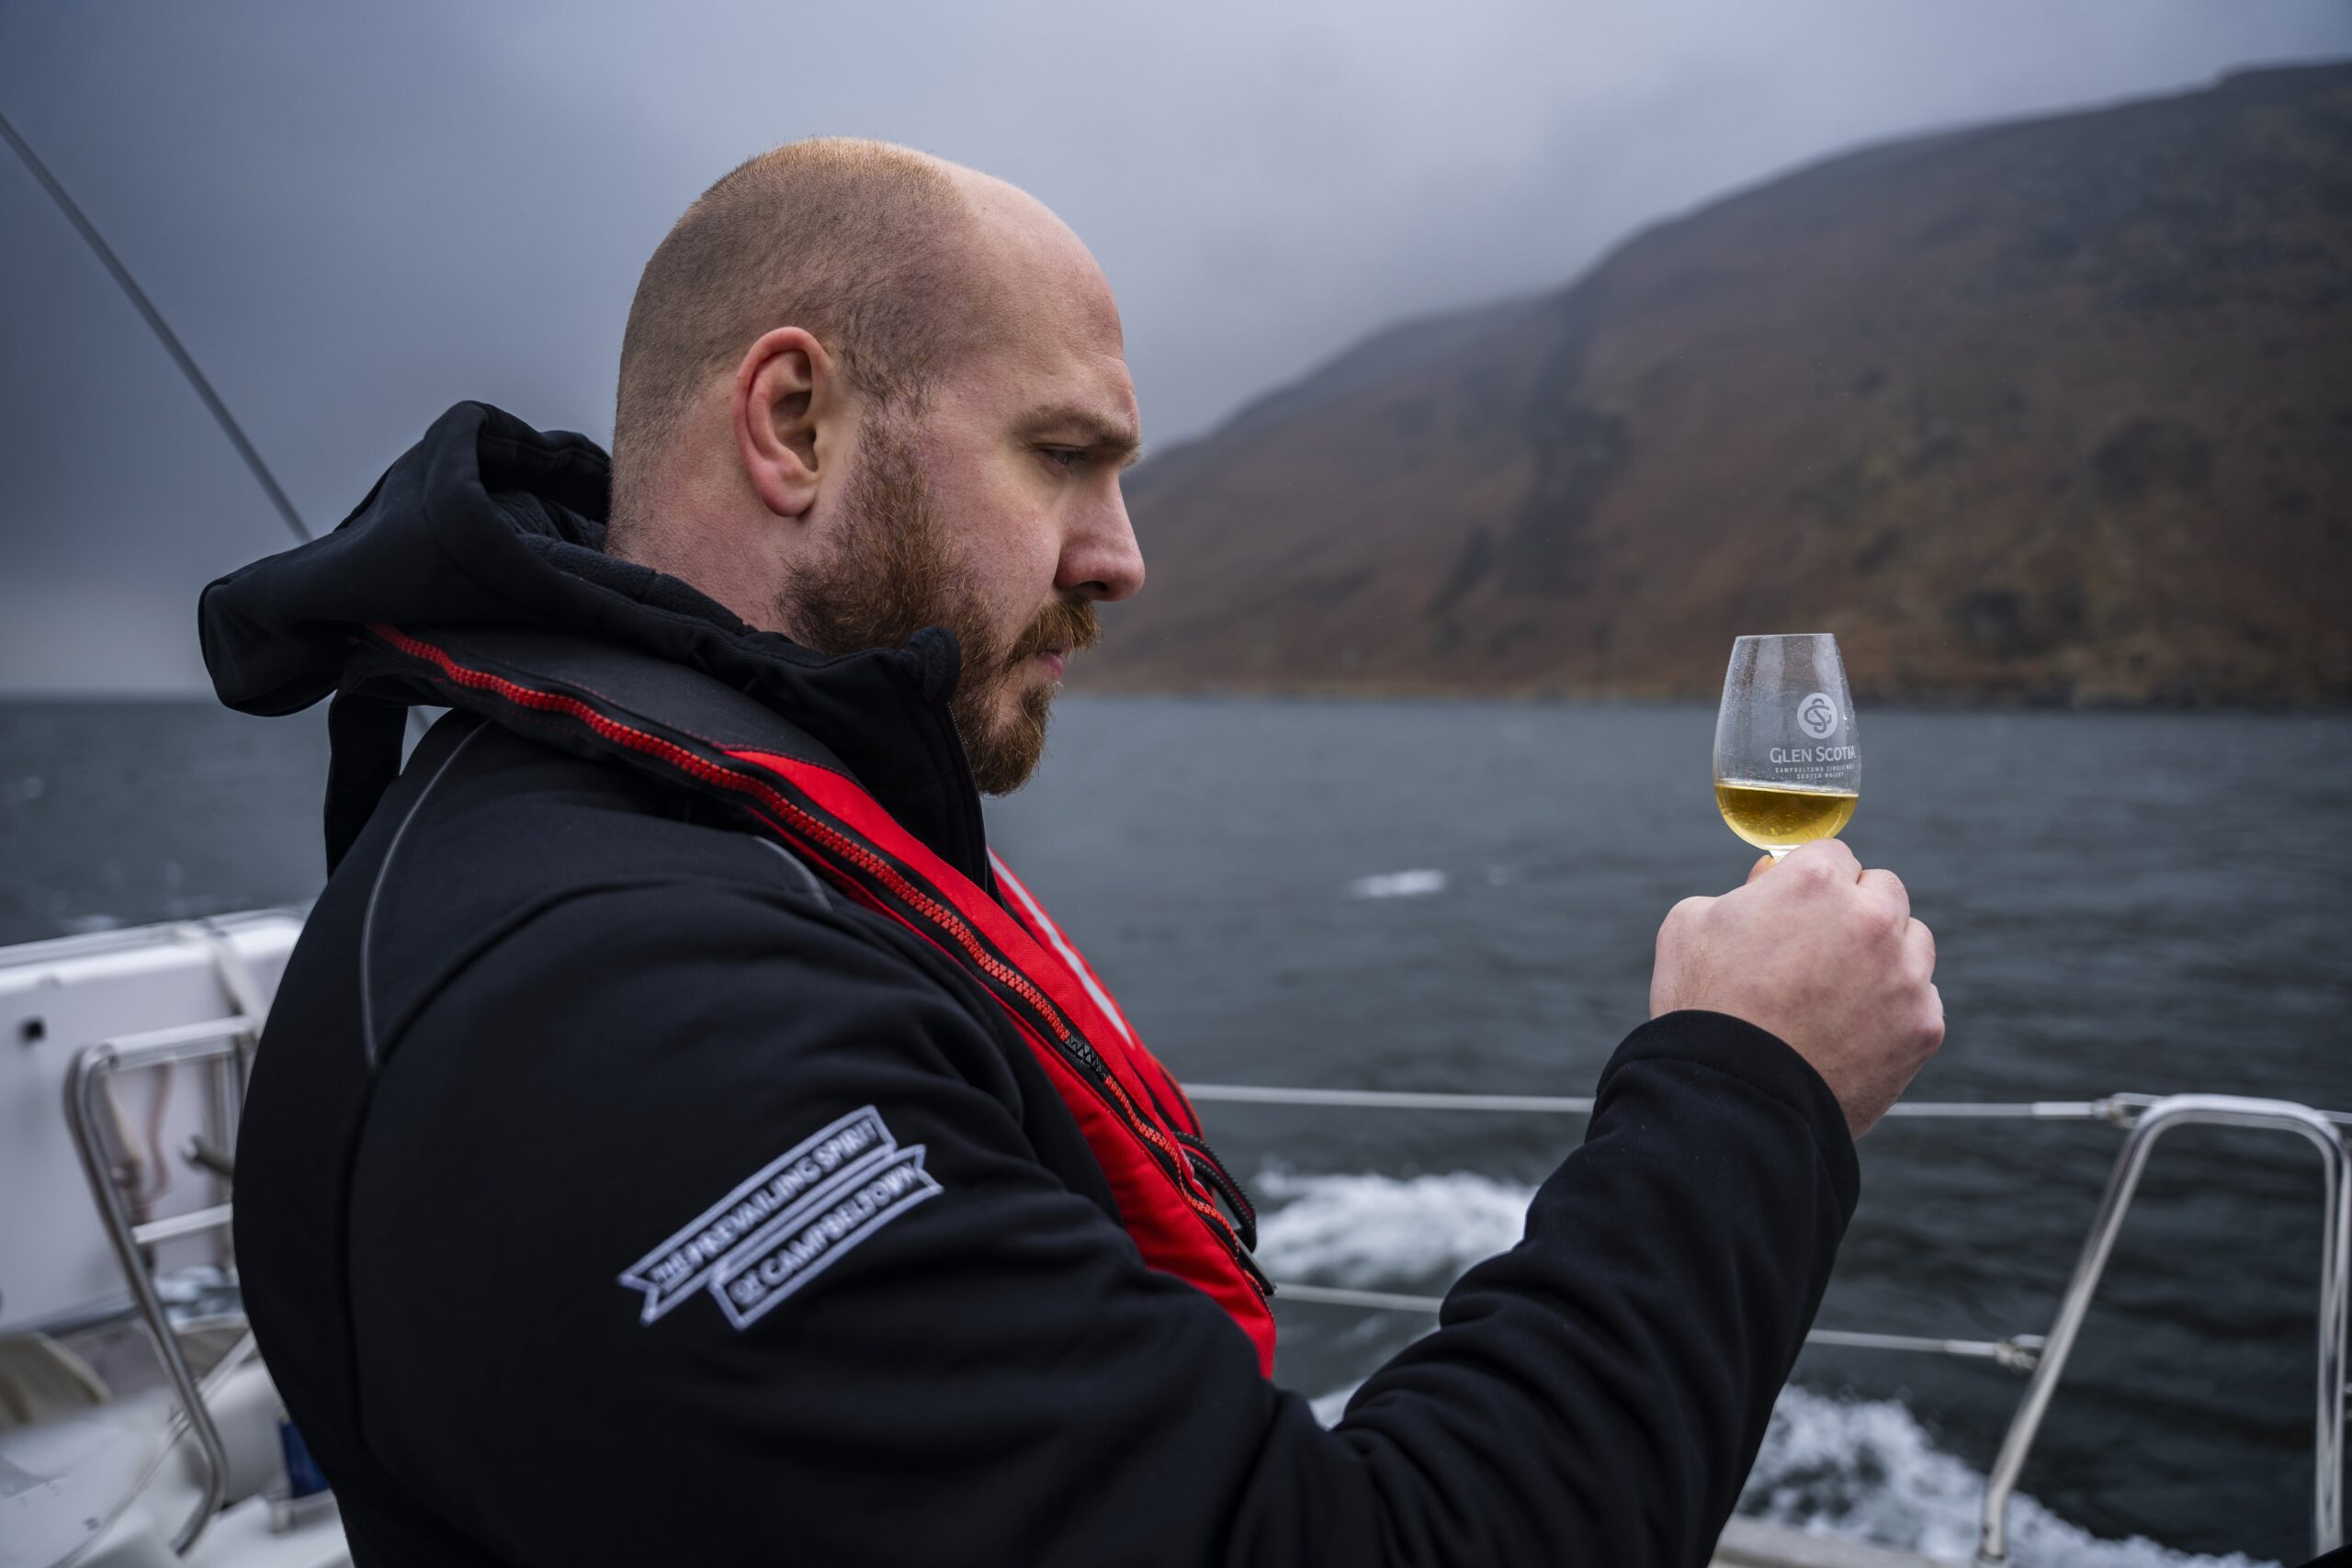 Graeme Johncock inspects a dram of whisky in a glencairn glass whilst on a boat